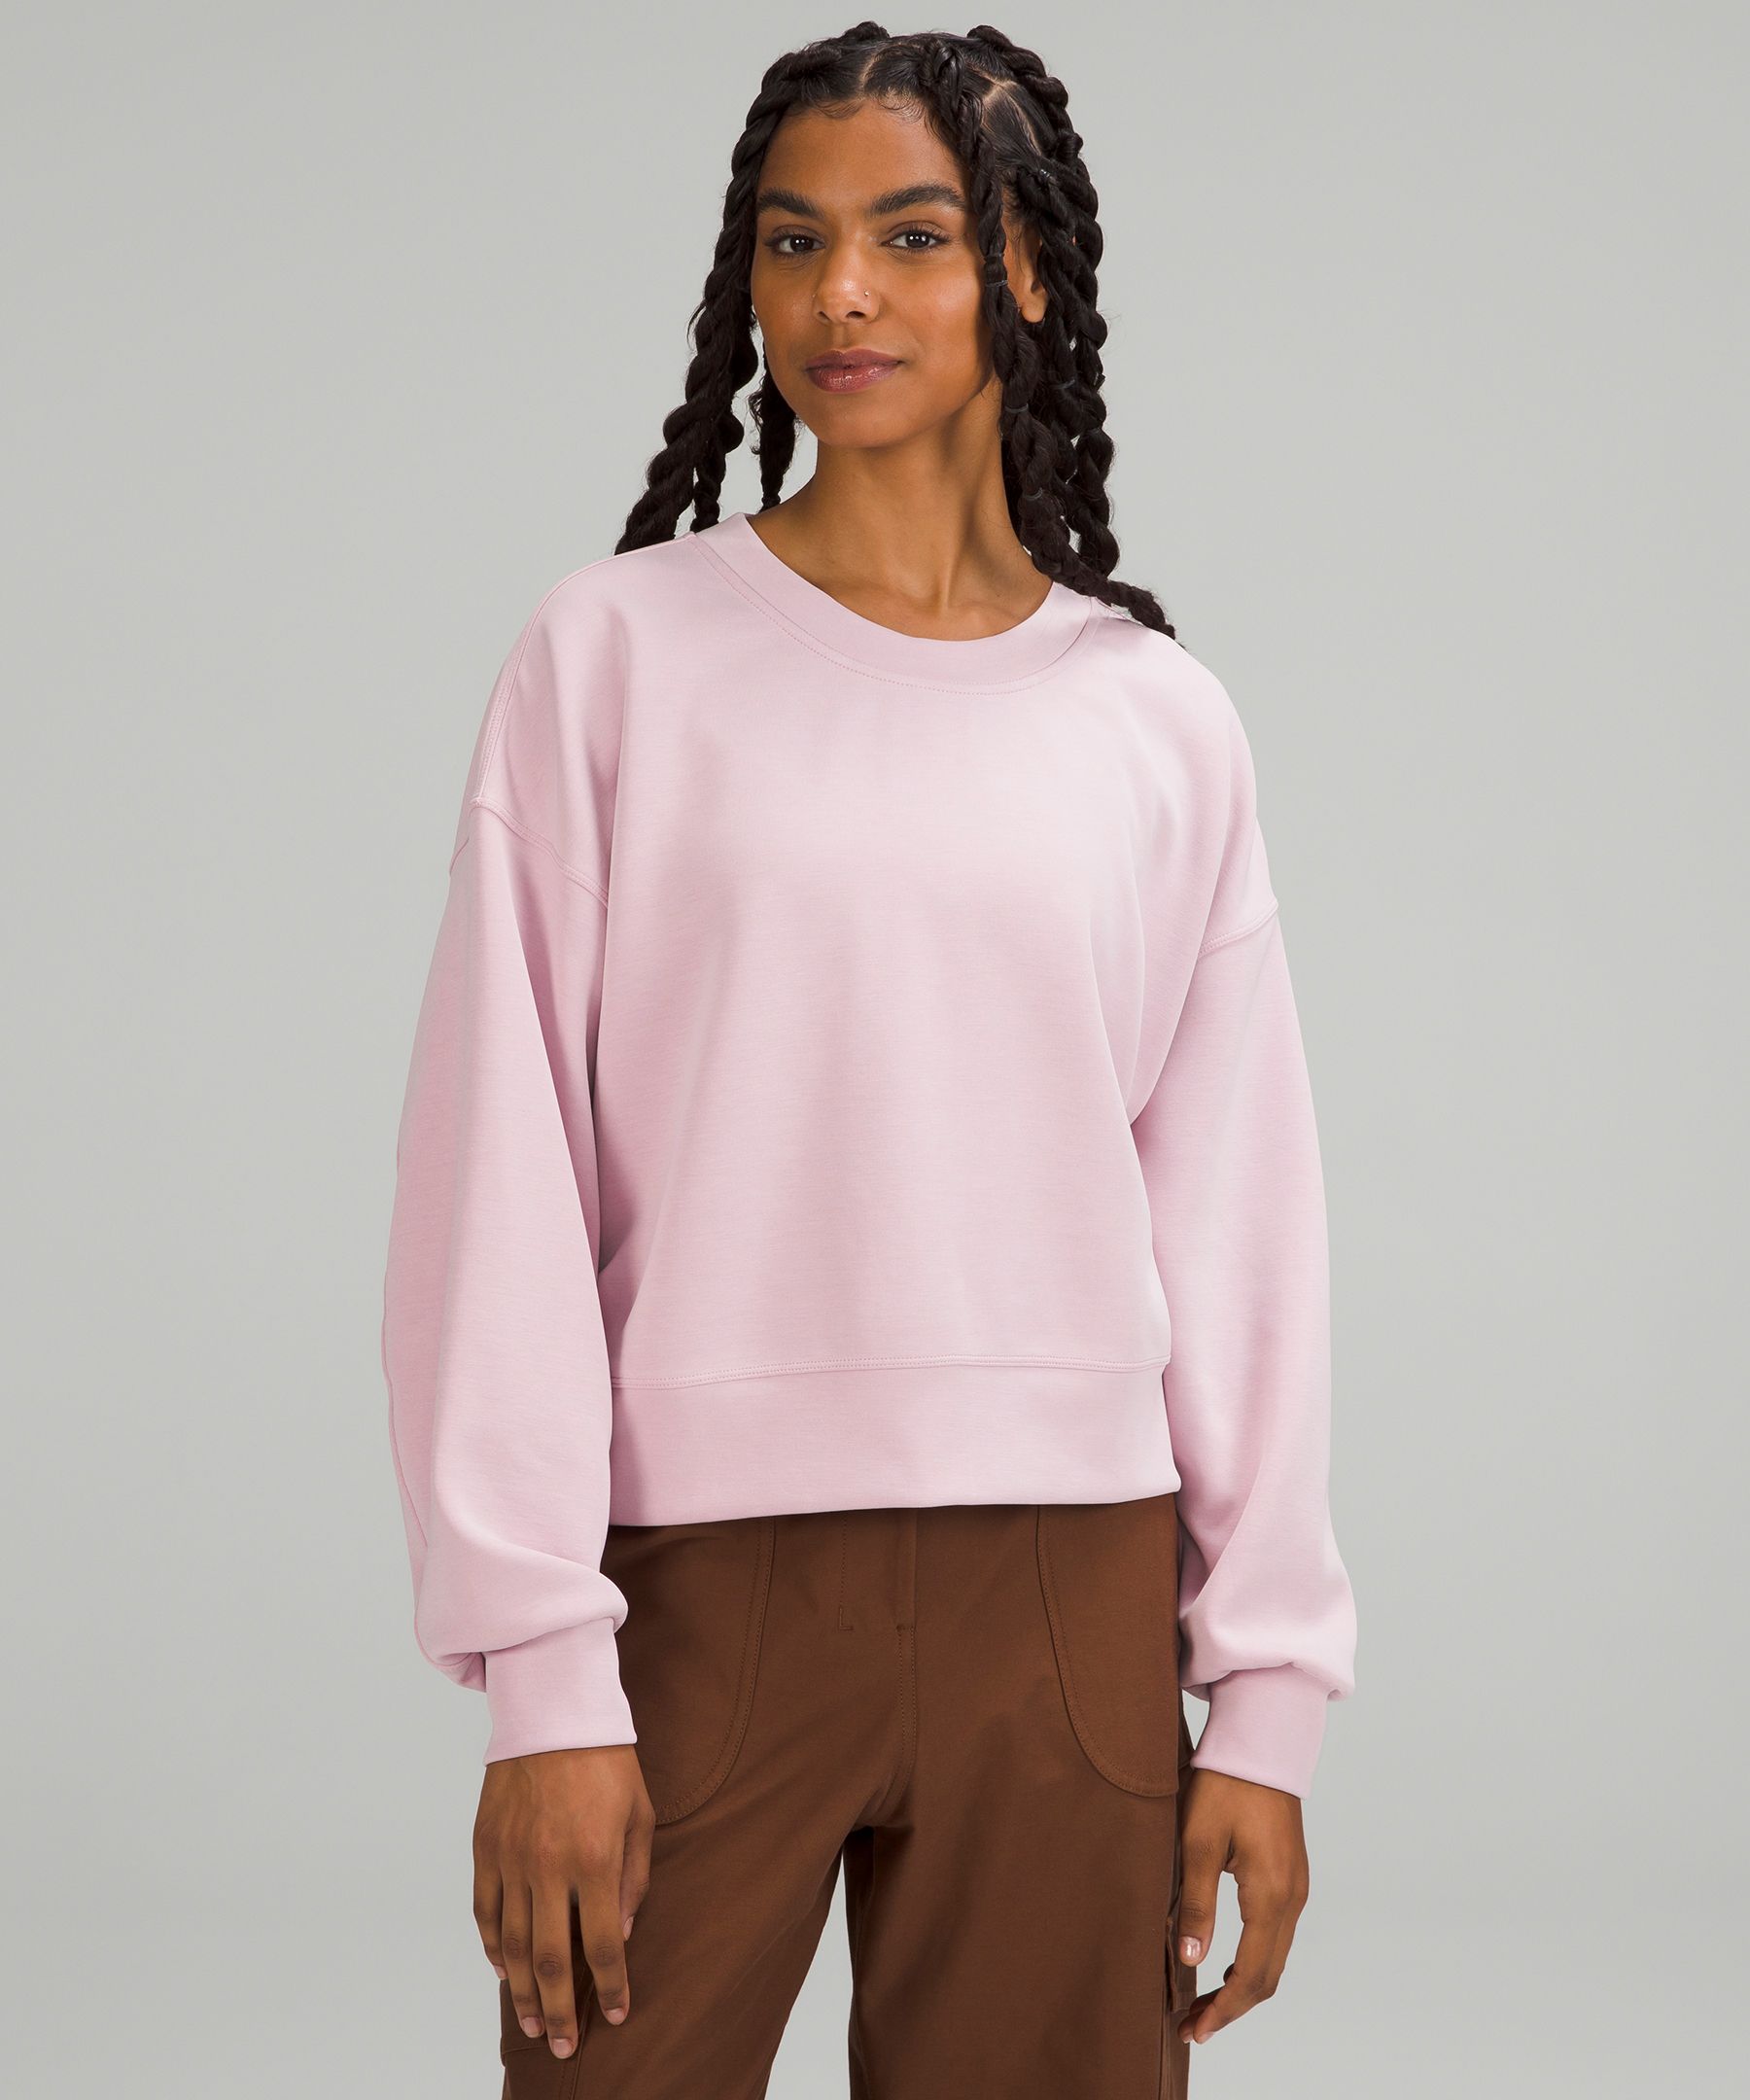 Perfectly Oversized Cropped Crew *Softstreme | Women's Hoodies ...